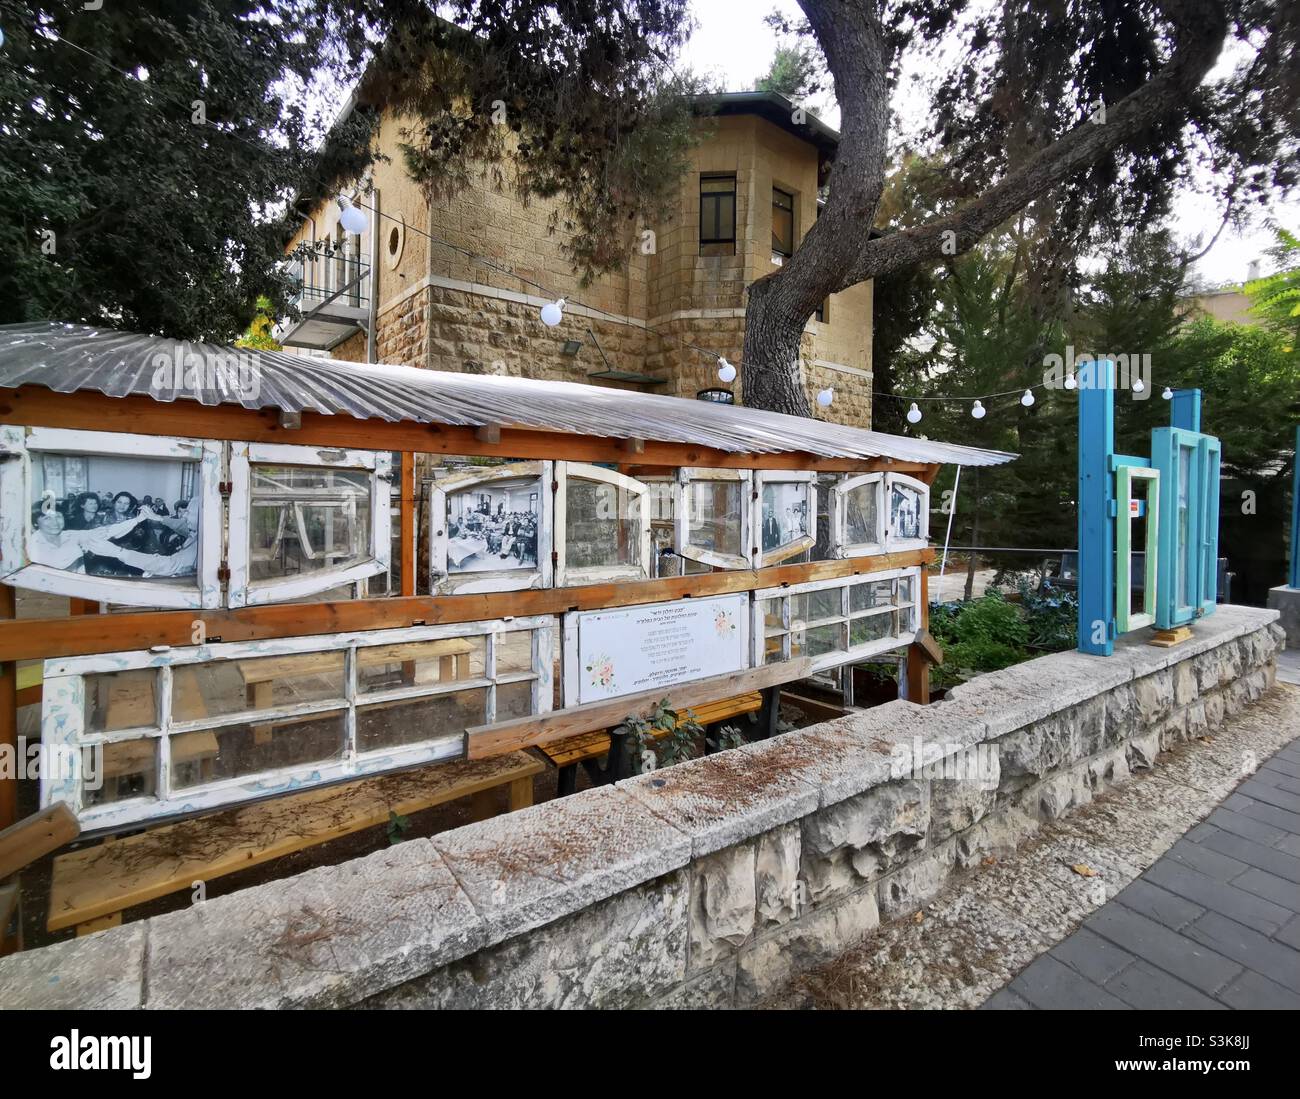 Palmach exhibition in a community center on the Palmach street in Jerusalem, Israel. Stock Photo